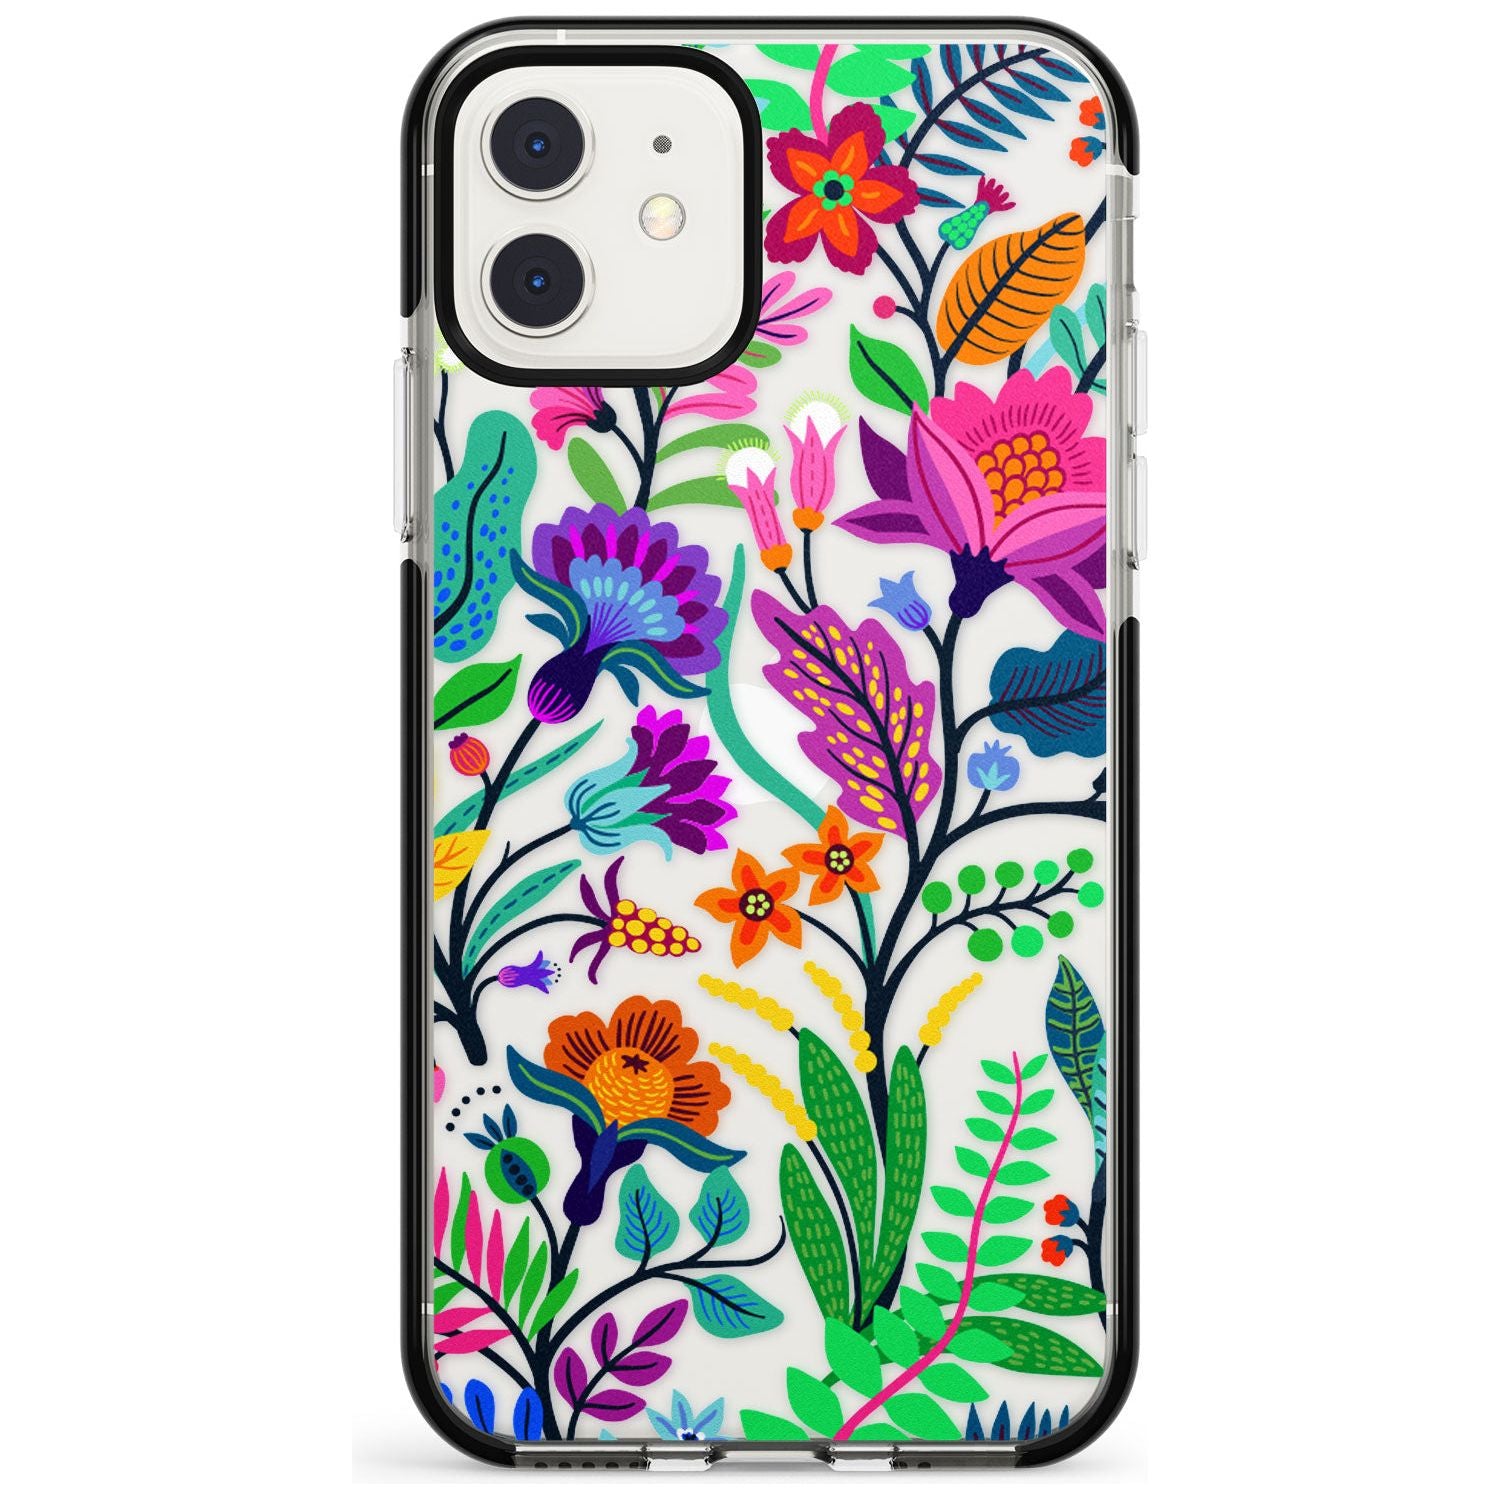 Floral Vibe Black Impact Phone Case for iPhone 11 Pro Max